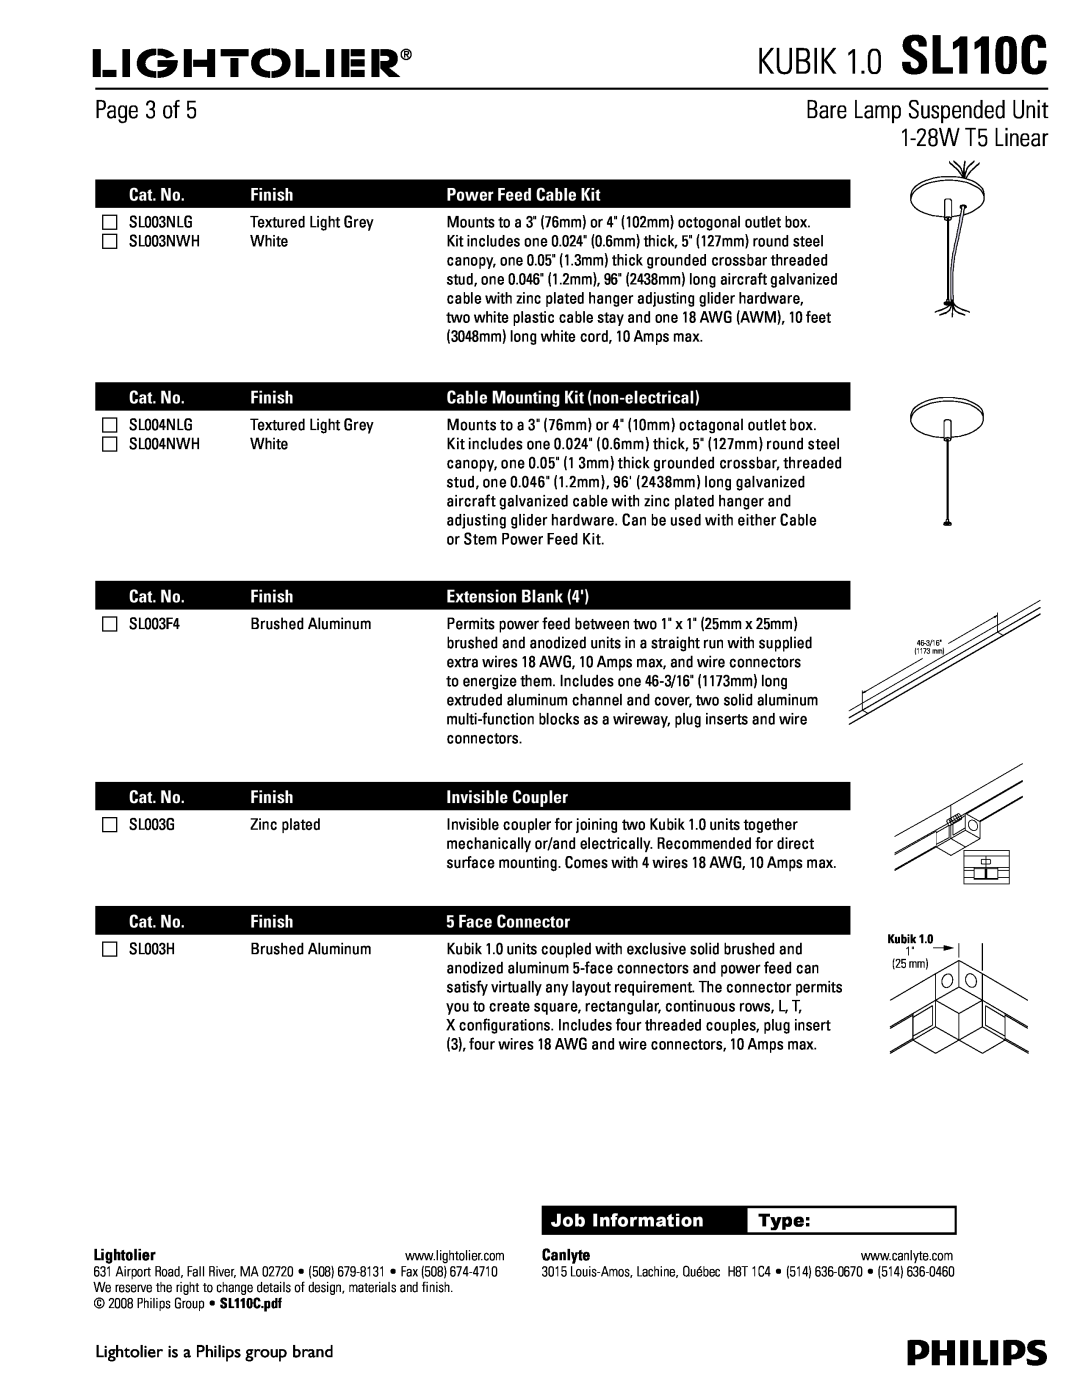 Lightolier dimensions Page 3 of, KUBIK 1.0 SL110C, Bare Lamp Suspended Unit, 1-28WT5 Linear, Type 